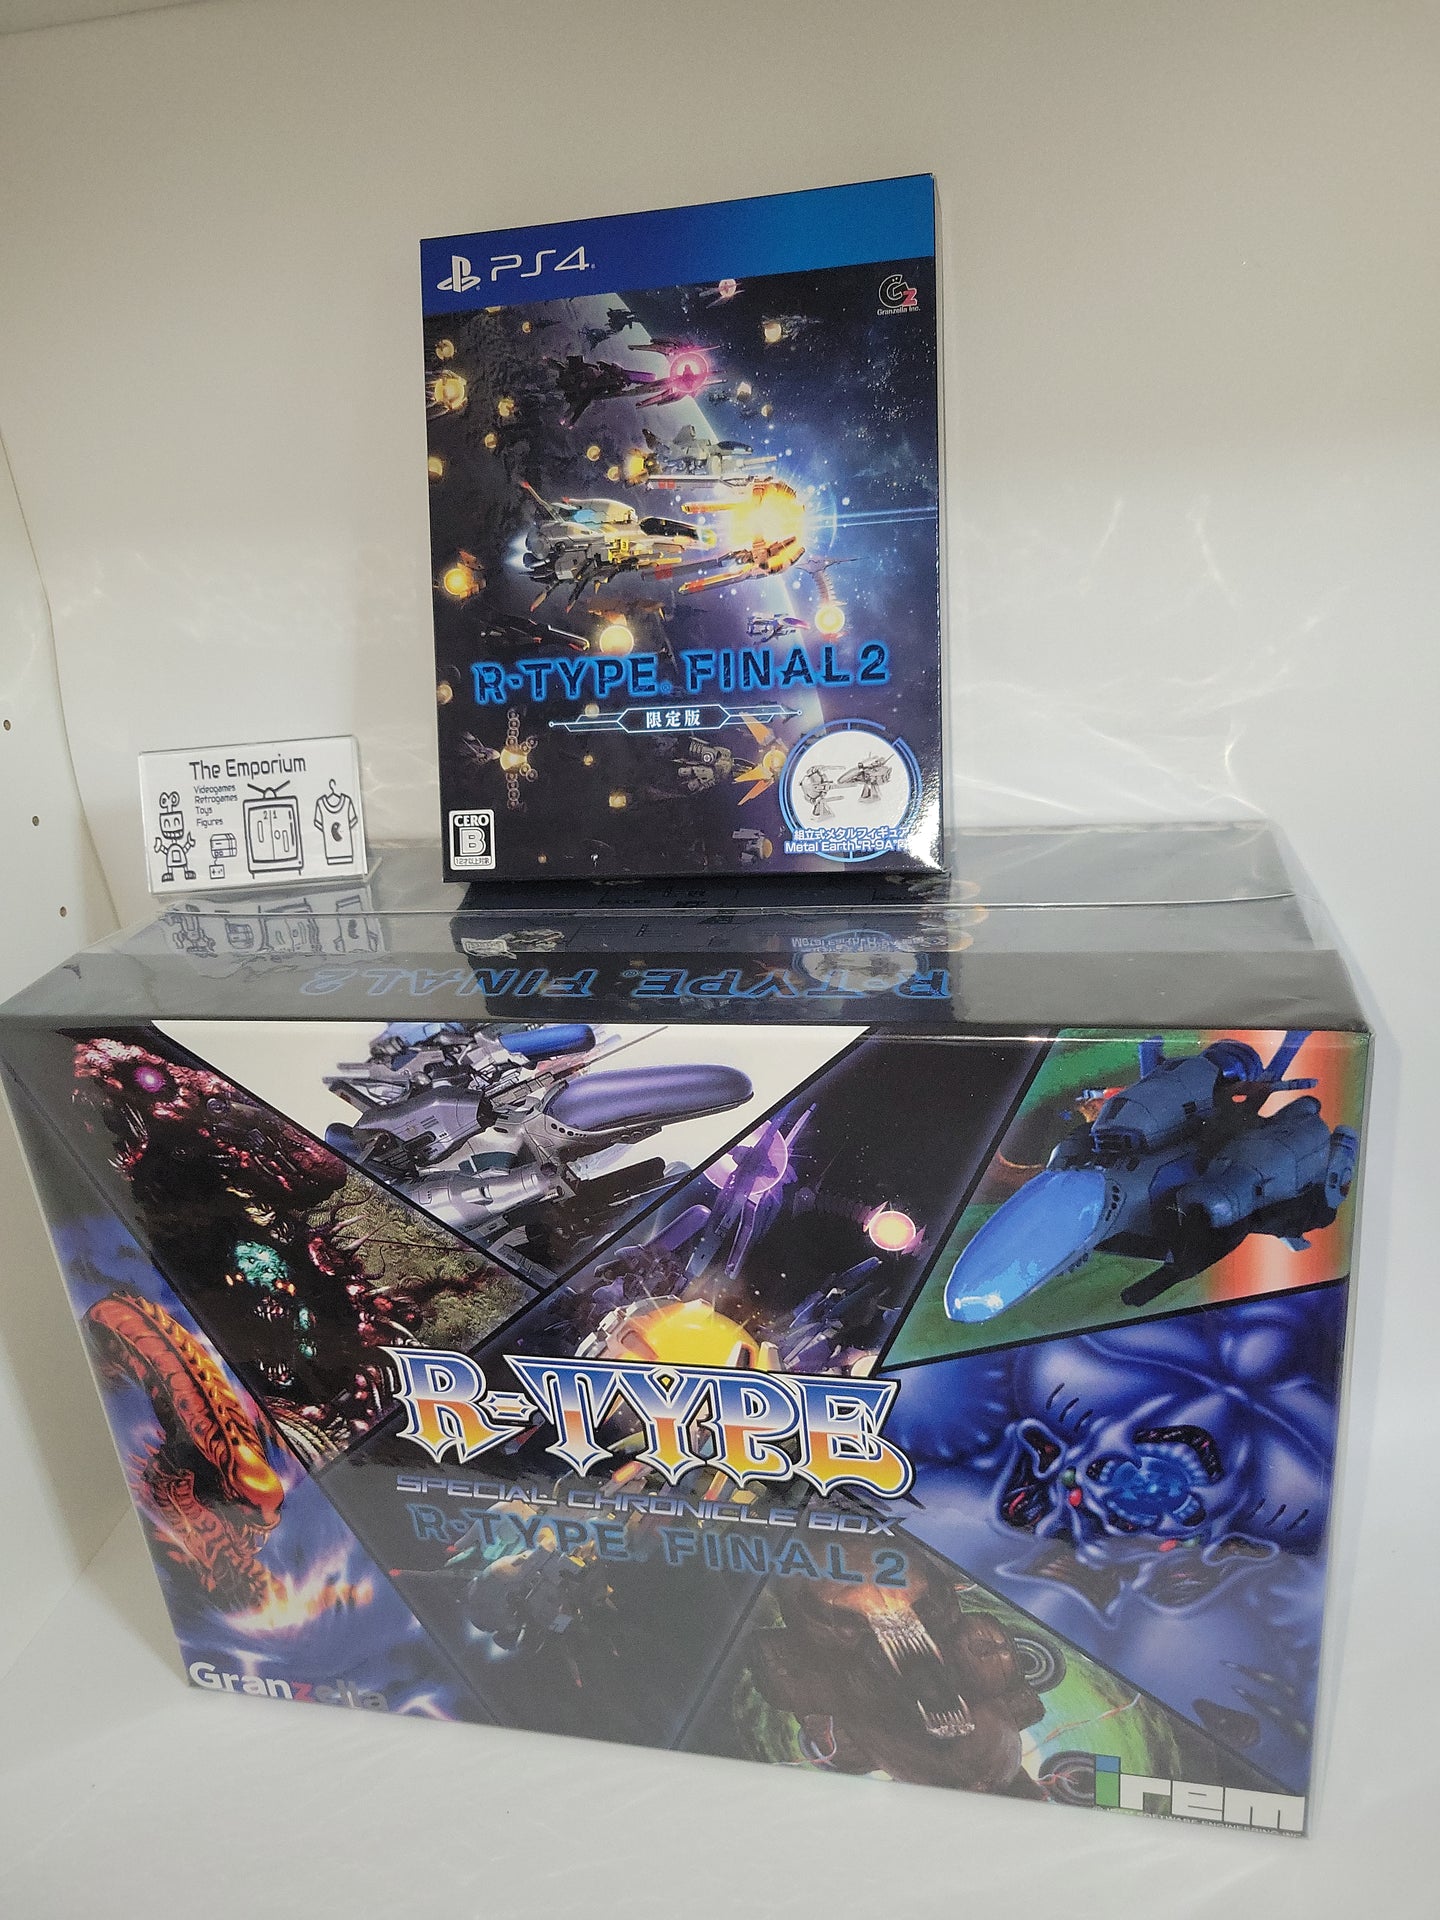 R-Type Final 2 [Limited Edition] - Sony PS4 Playstation 4